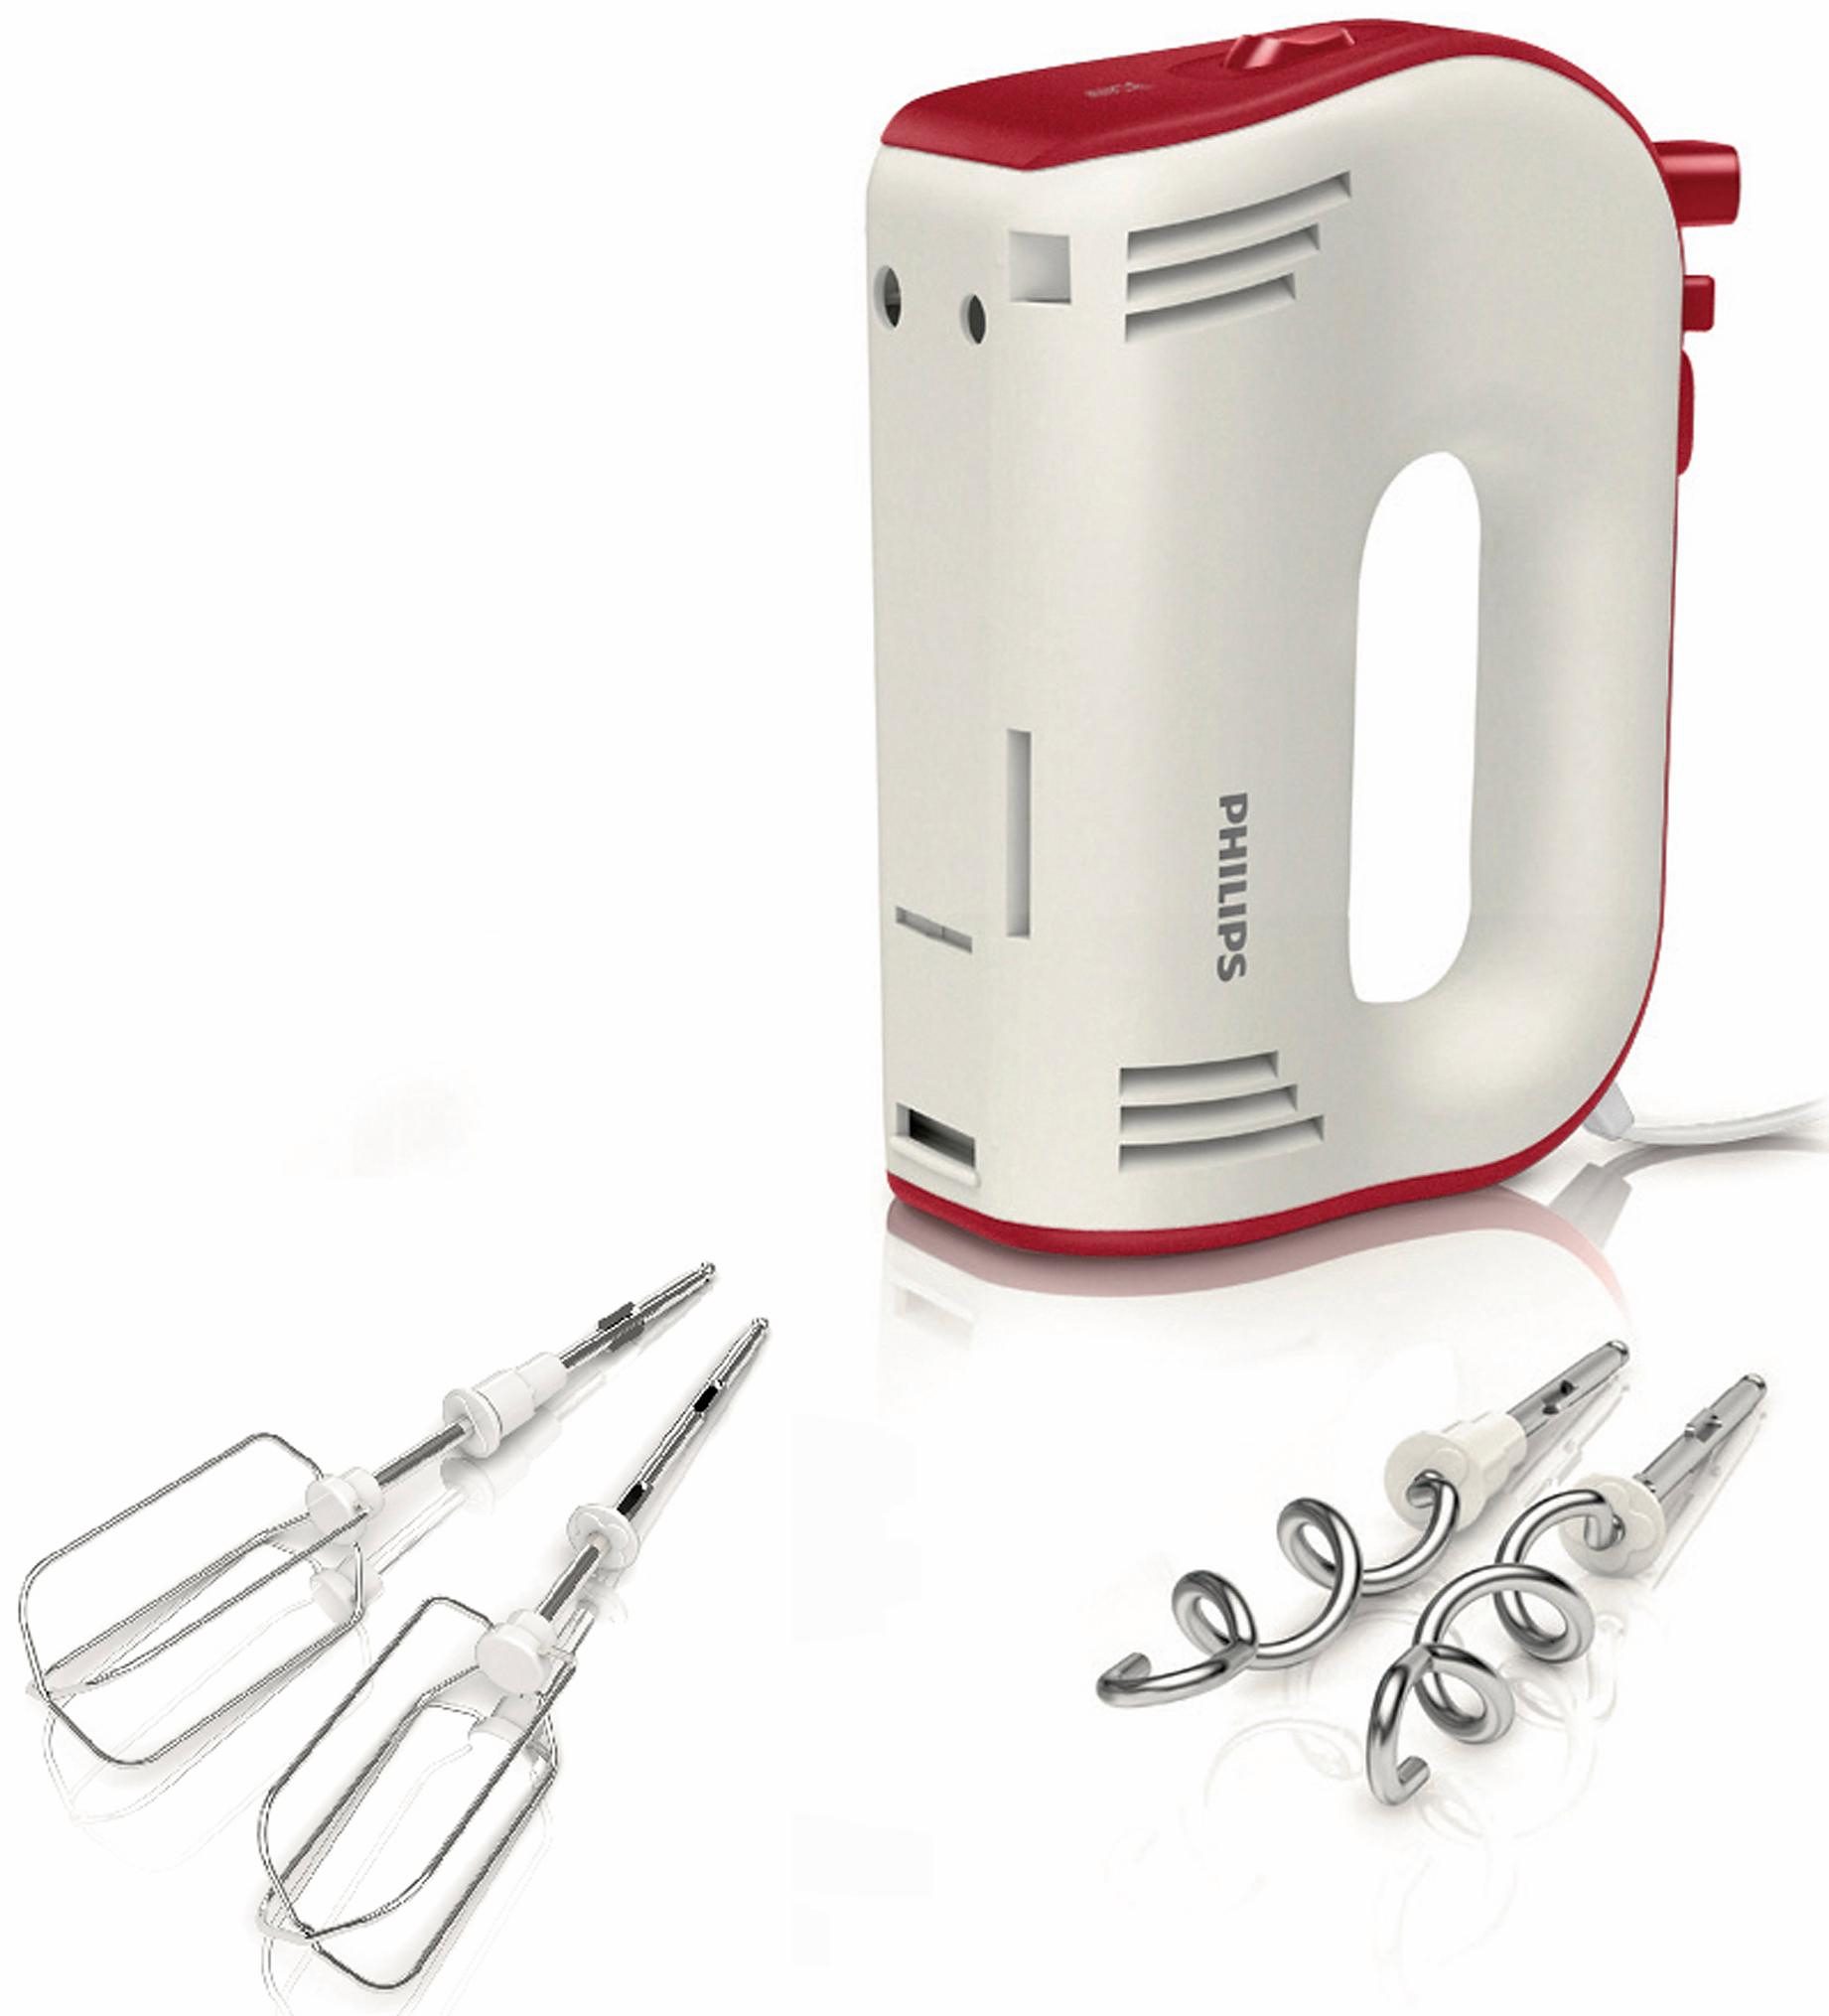 Otto - Philips PHILIPS handmixer HR1576/30 Avance Collection, 750 W, wit/rood